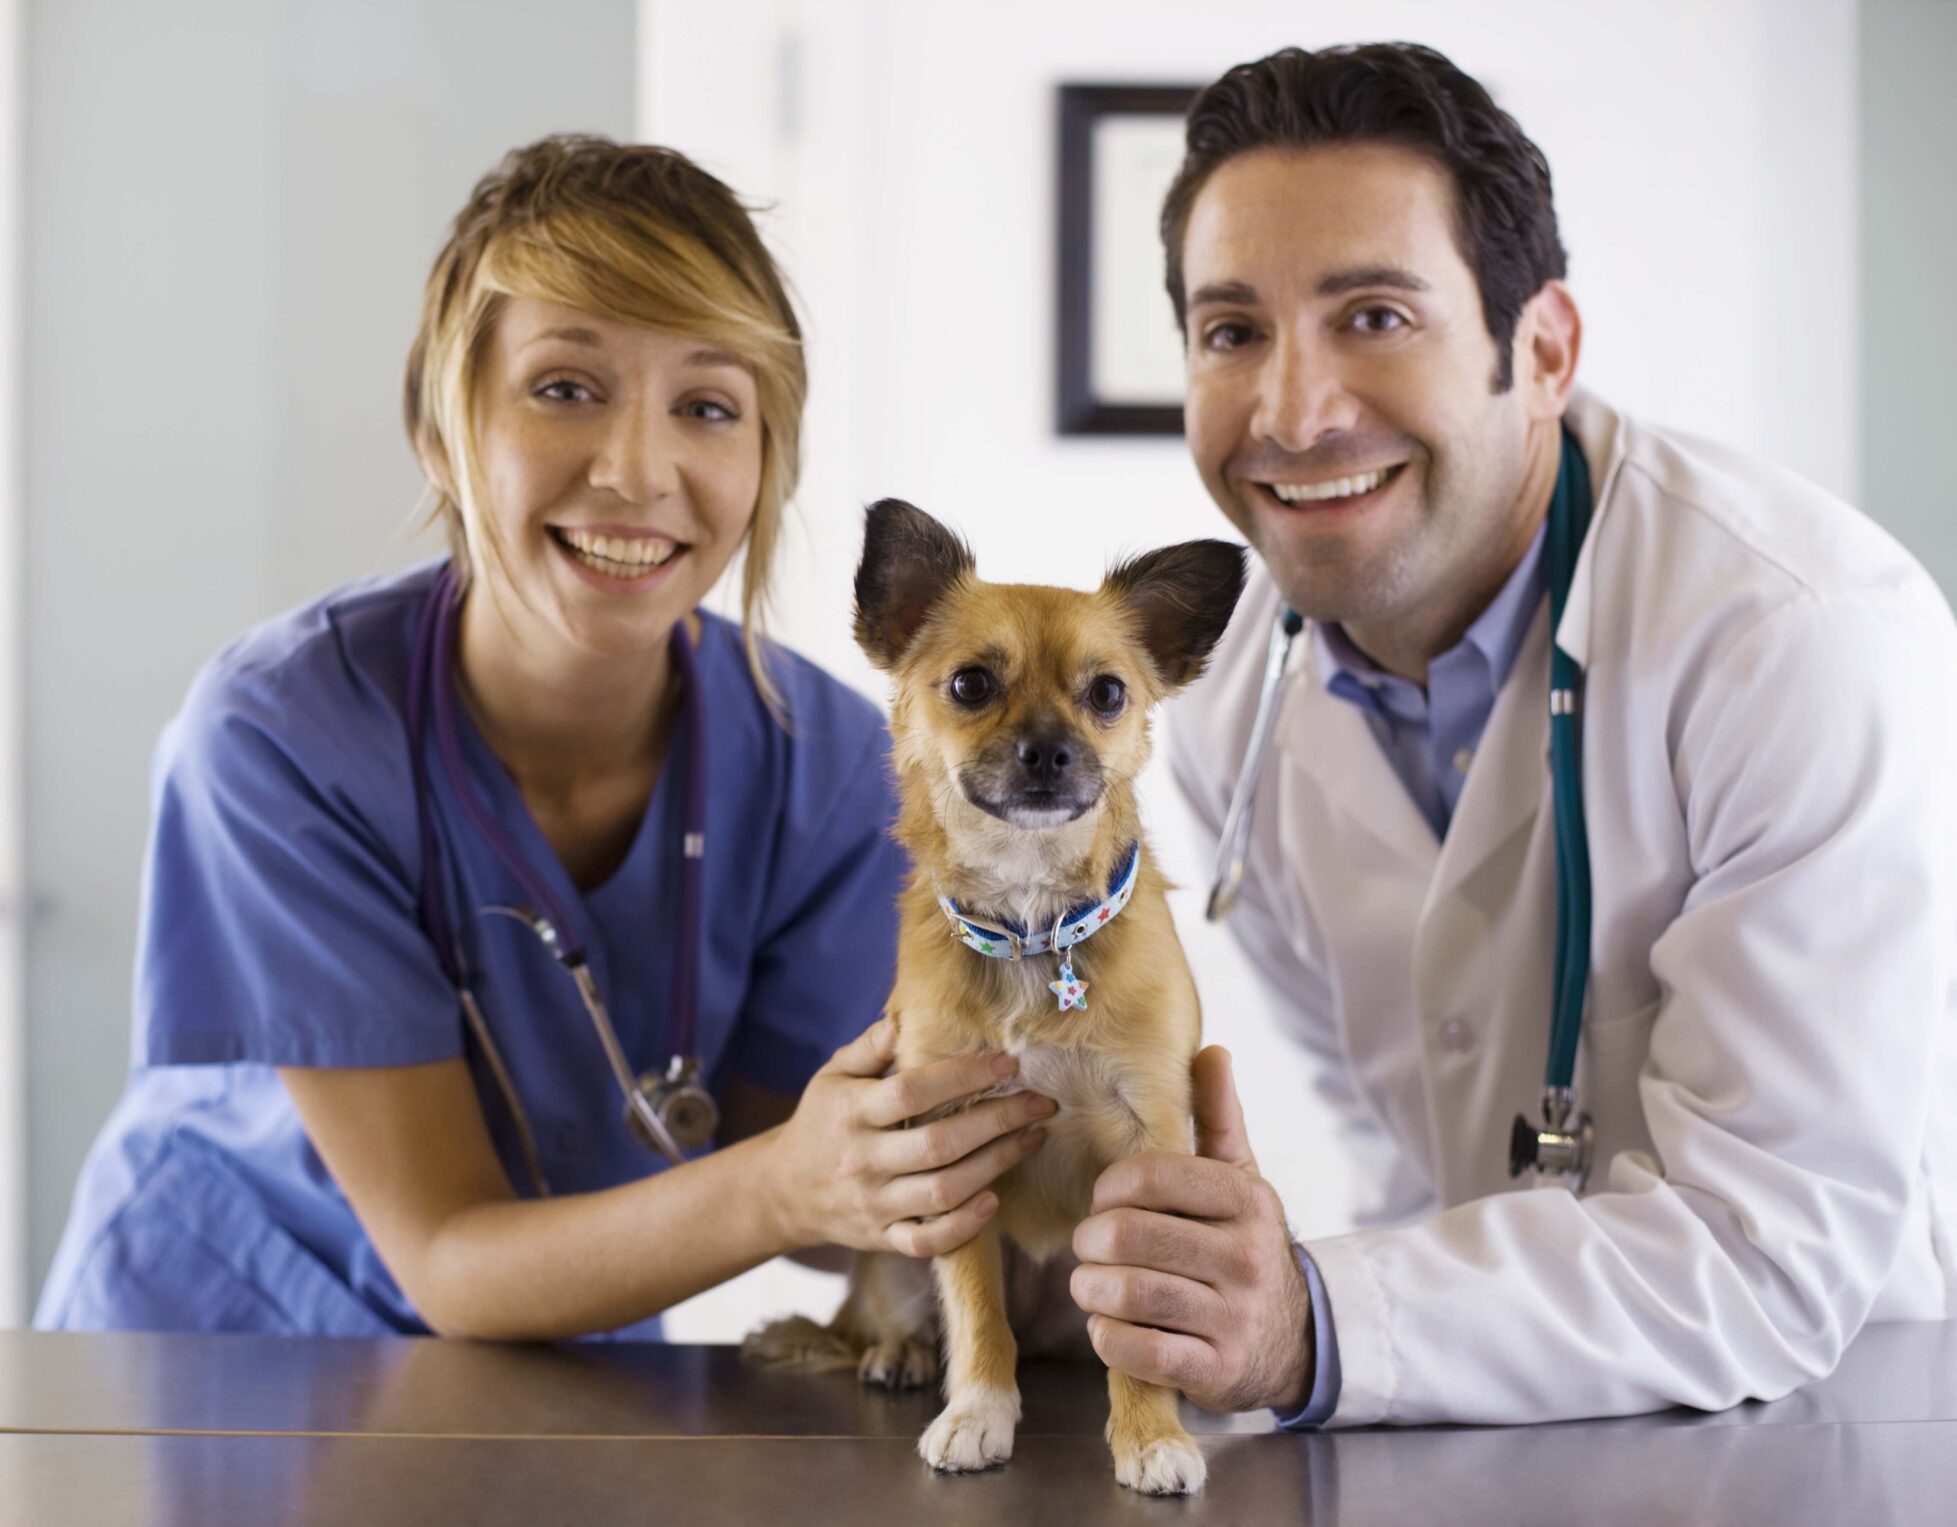 professional liability insurance for veterinarians